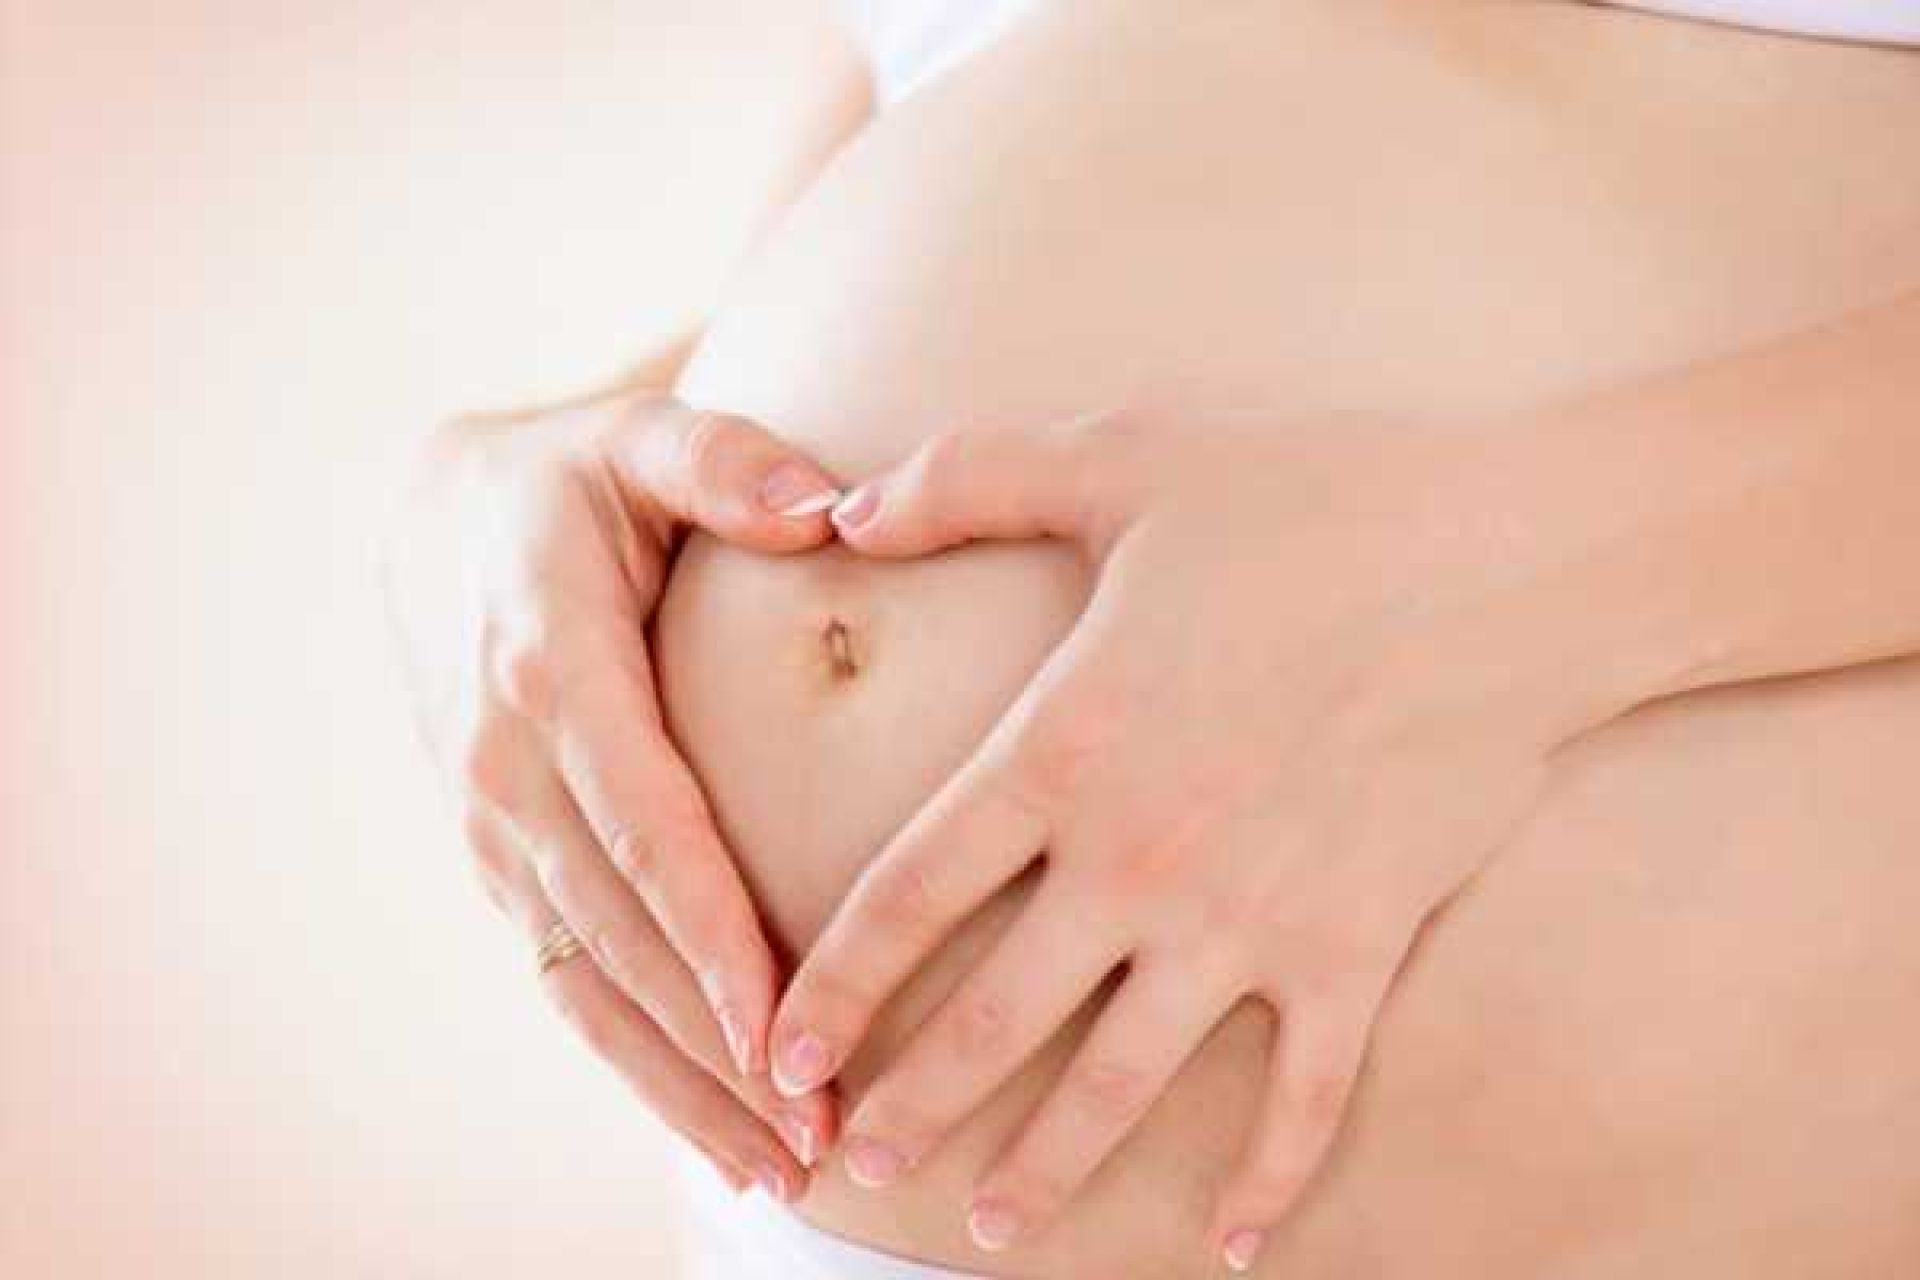 Using An Egg Donor: What You Need To Know To Get Pregnant with Egg Donation